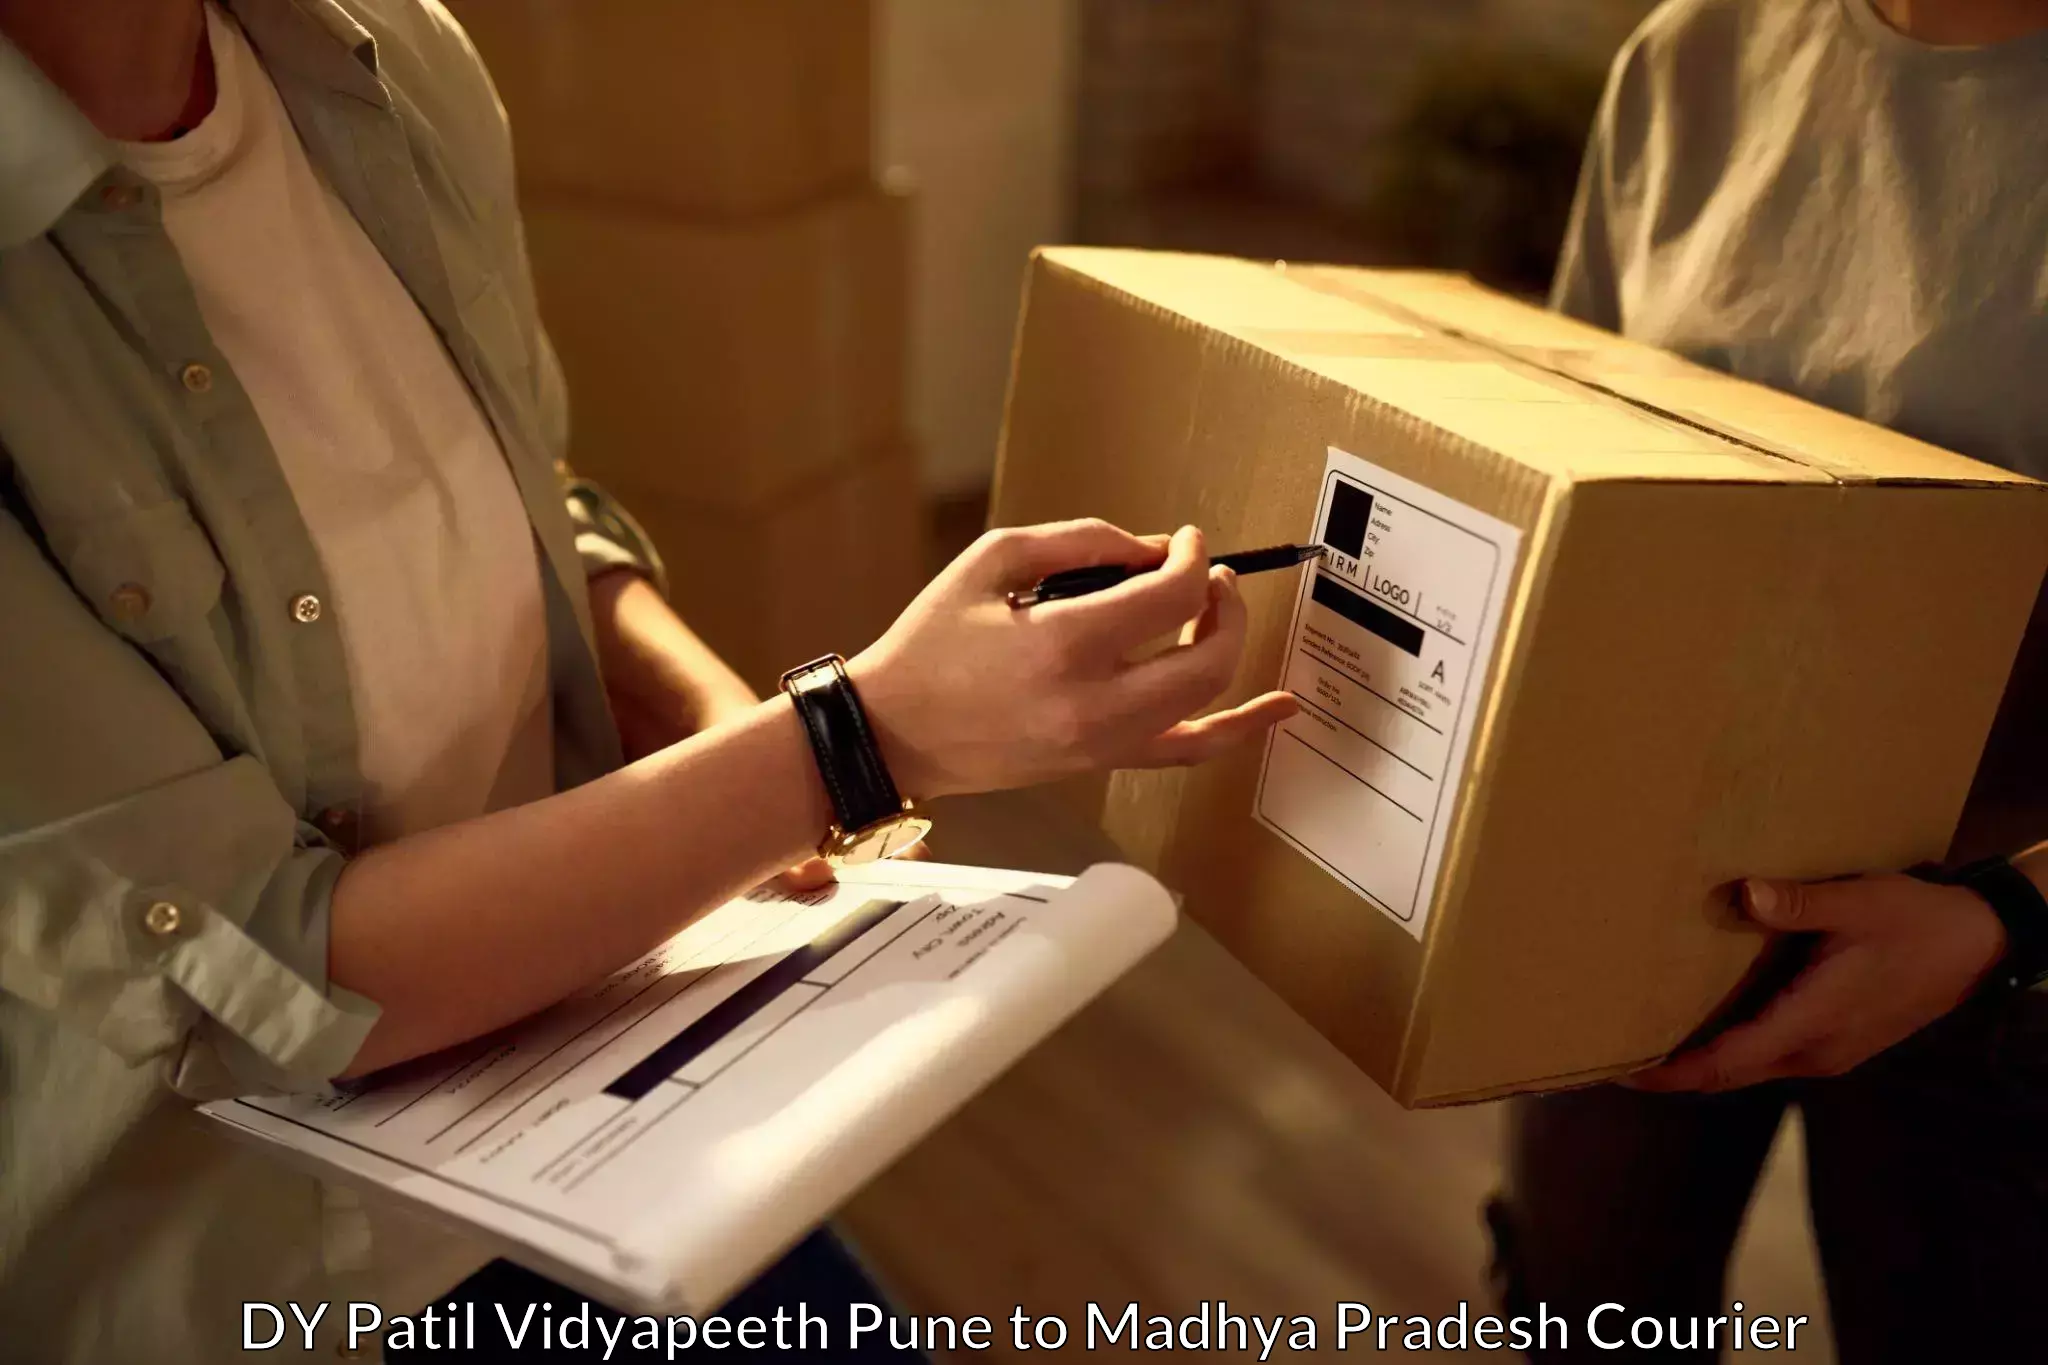 24-hour courier services DY Patil Vidyapeeth Pune to Raghogarh